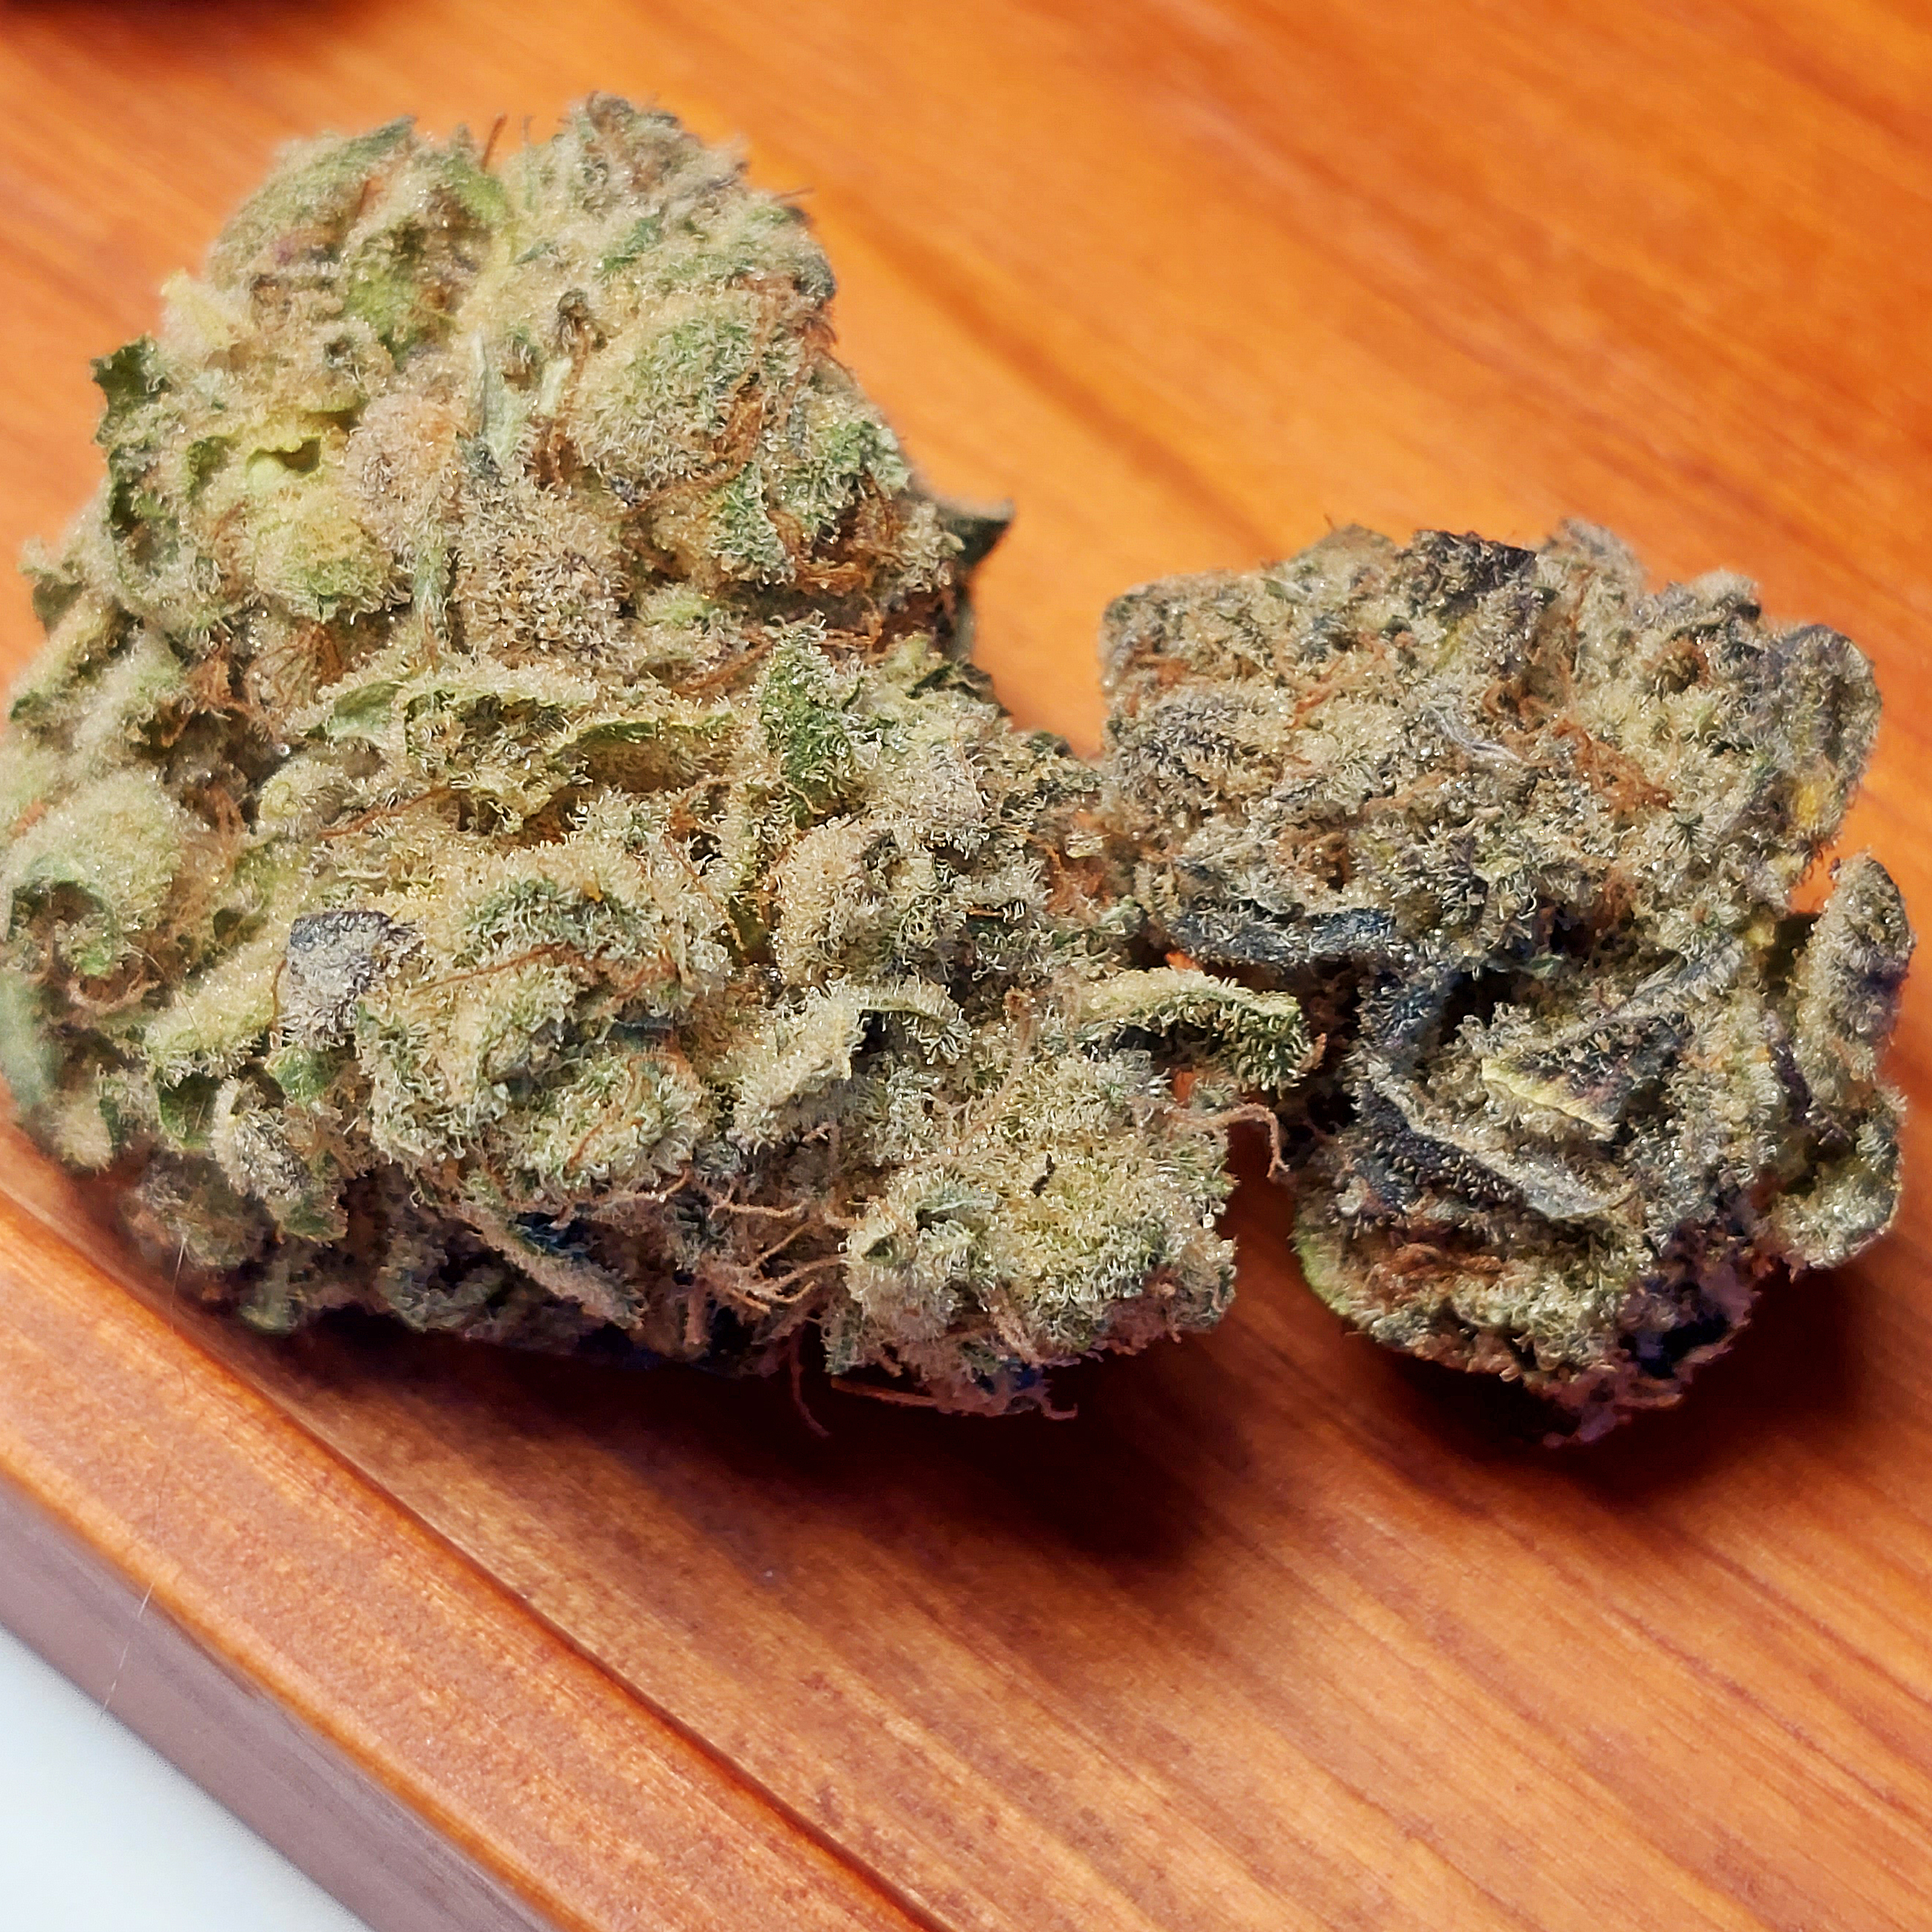 Nana Punch by Peers Cannabis: Canadian Weed Strain Review and Photos Legal Canada Pot Cultivar